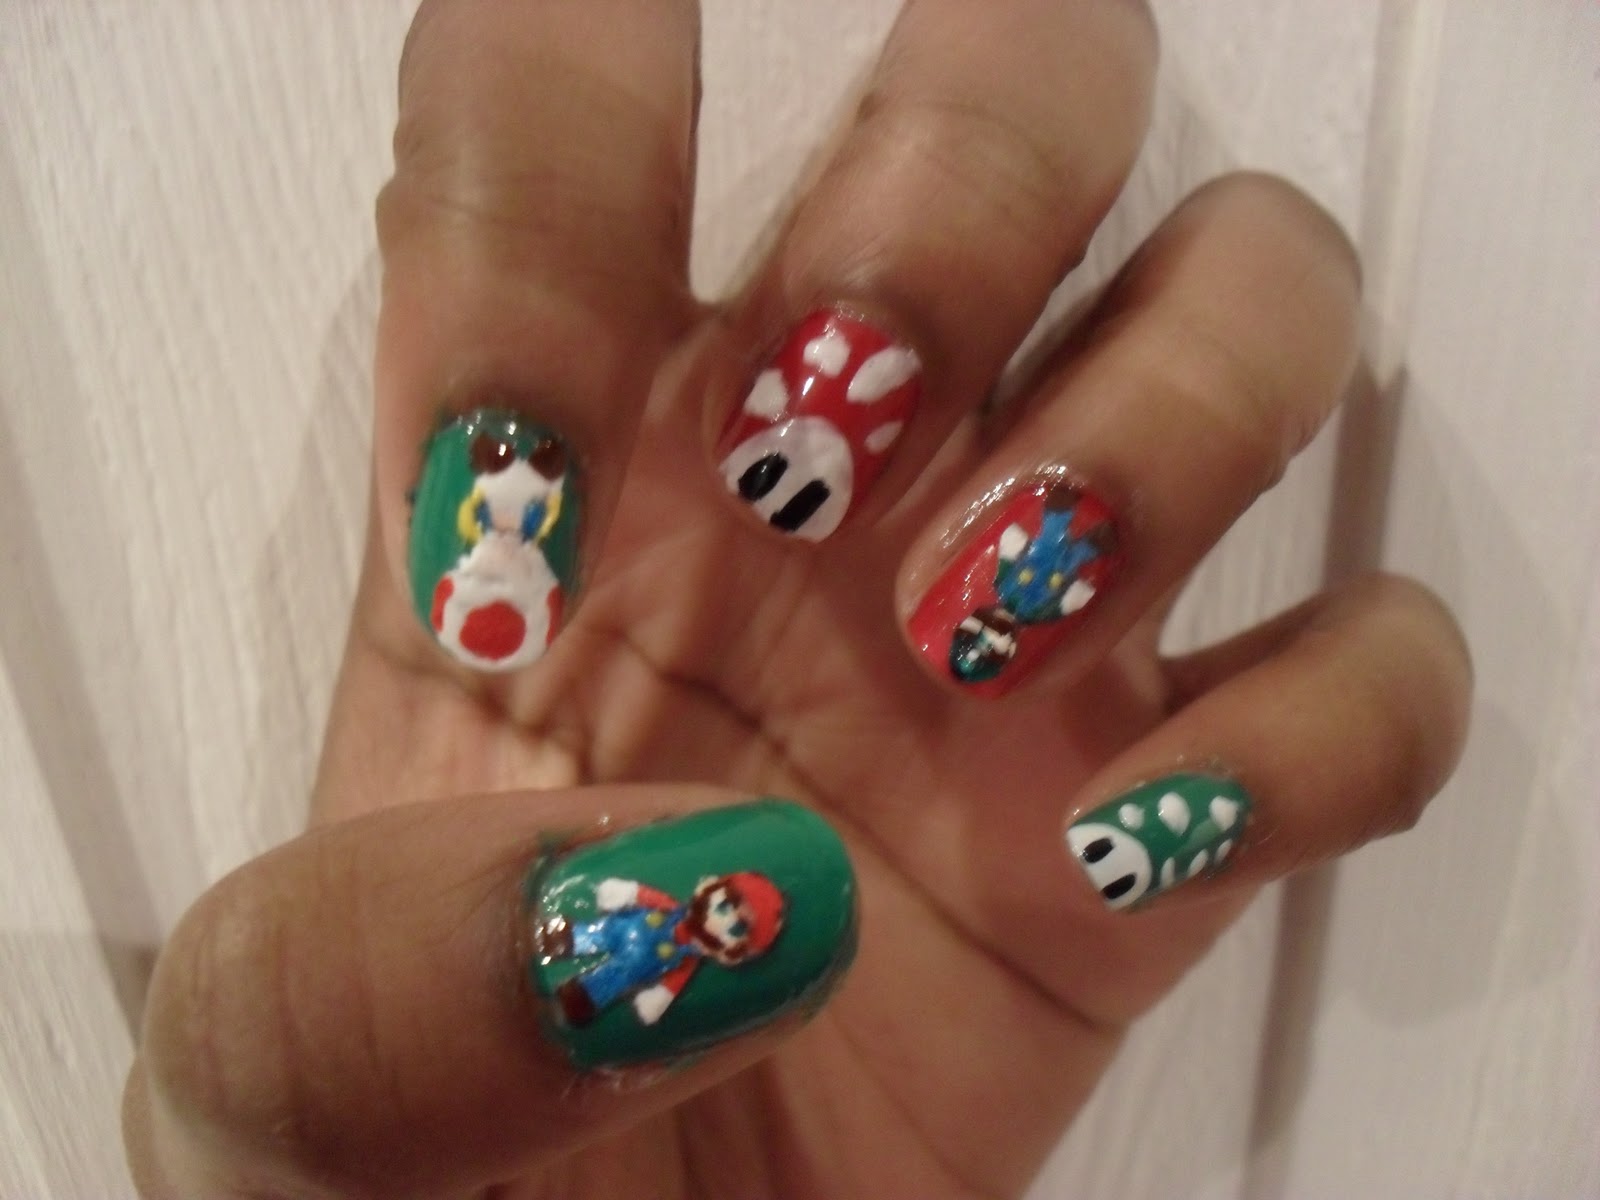 The nail art pen tolerated Mario but Luigi seems to be all eyebrow and